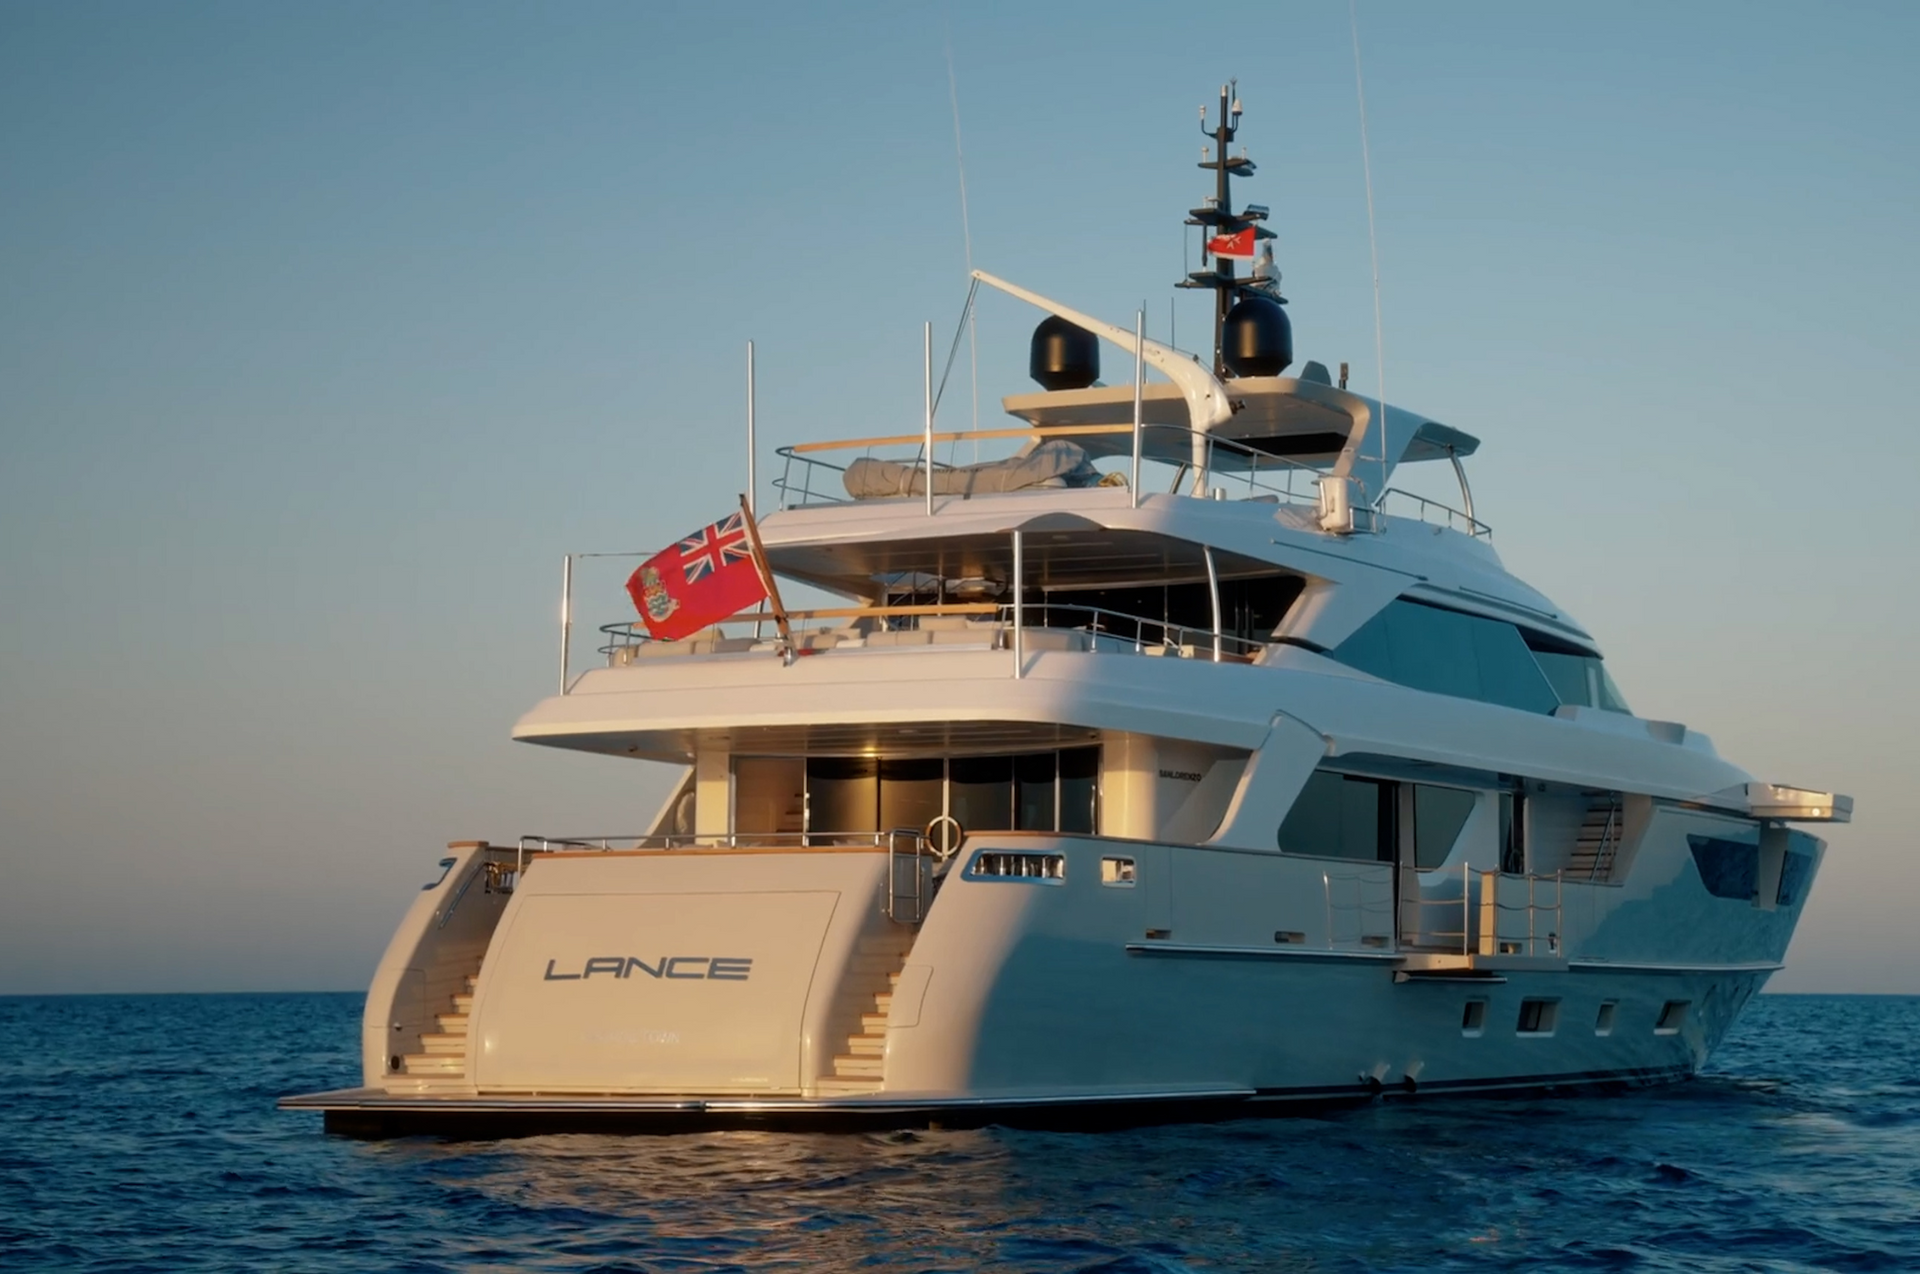 LANCE | From $220,000 per week | 10 guests